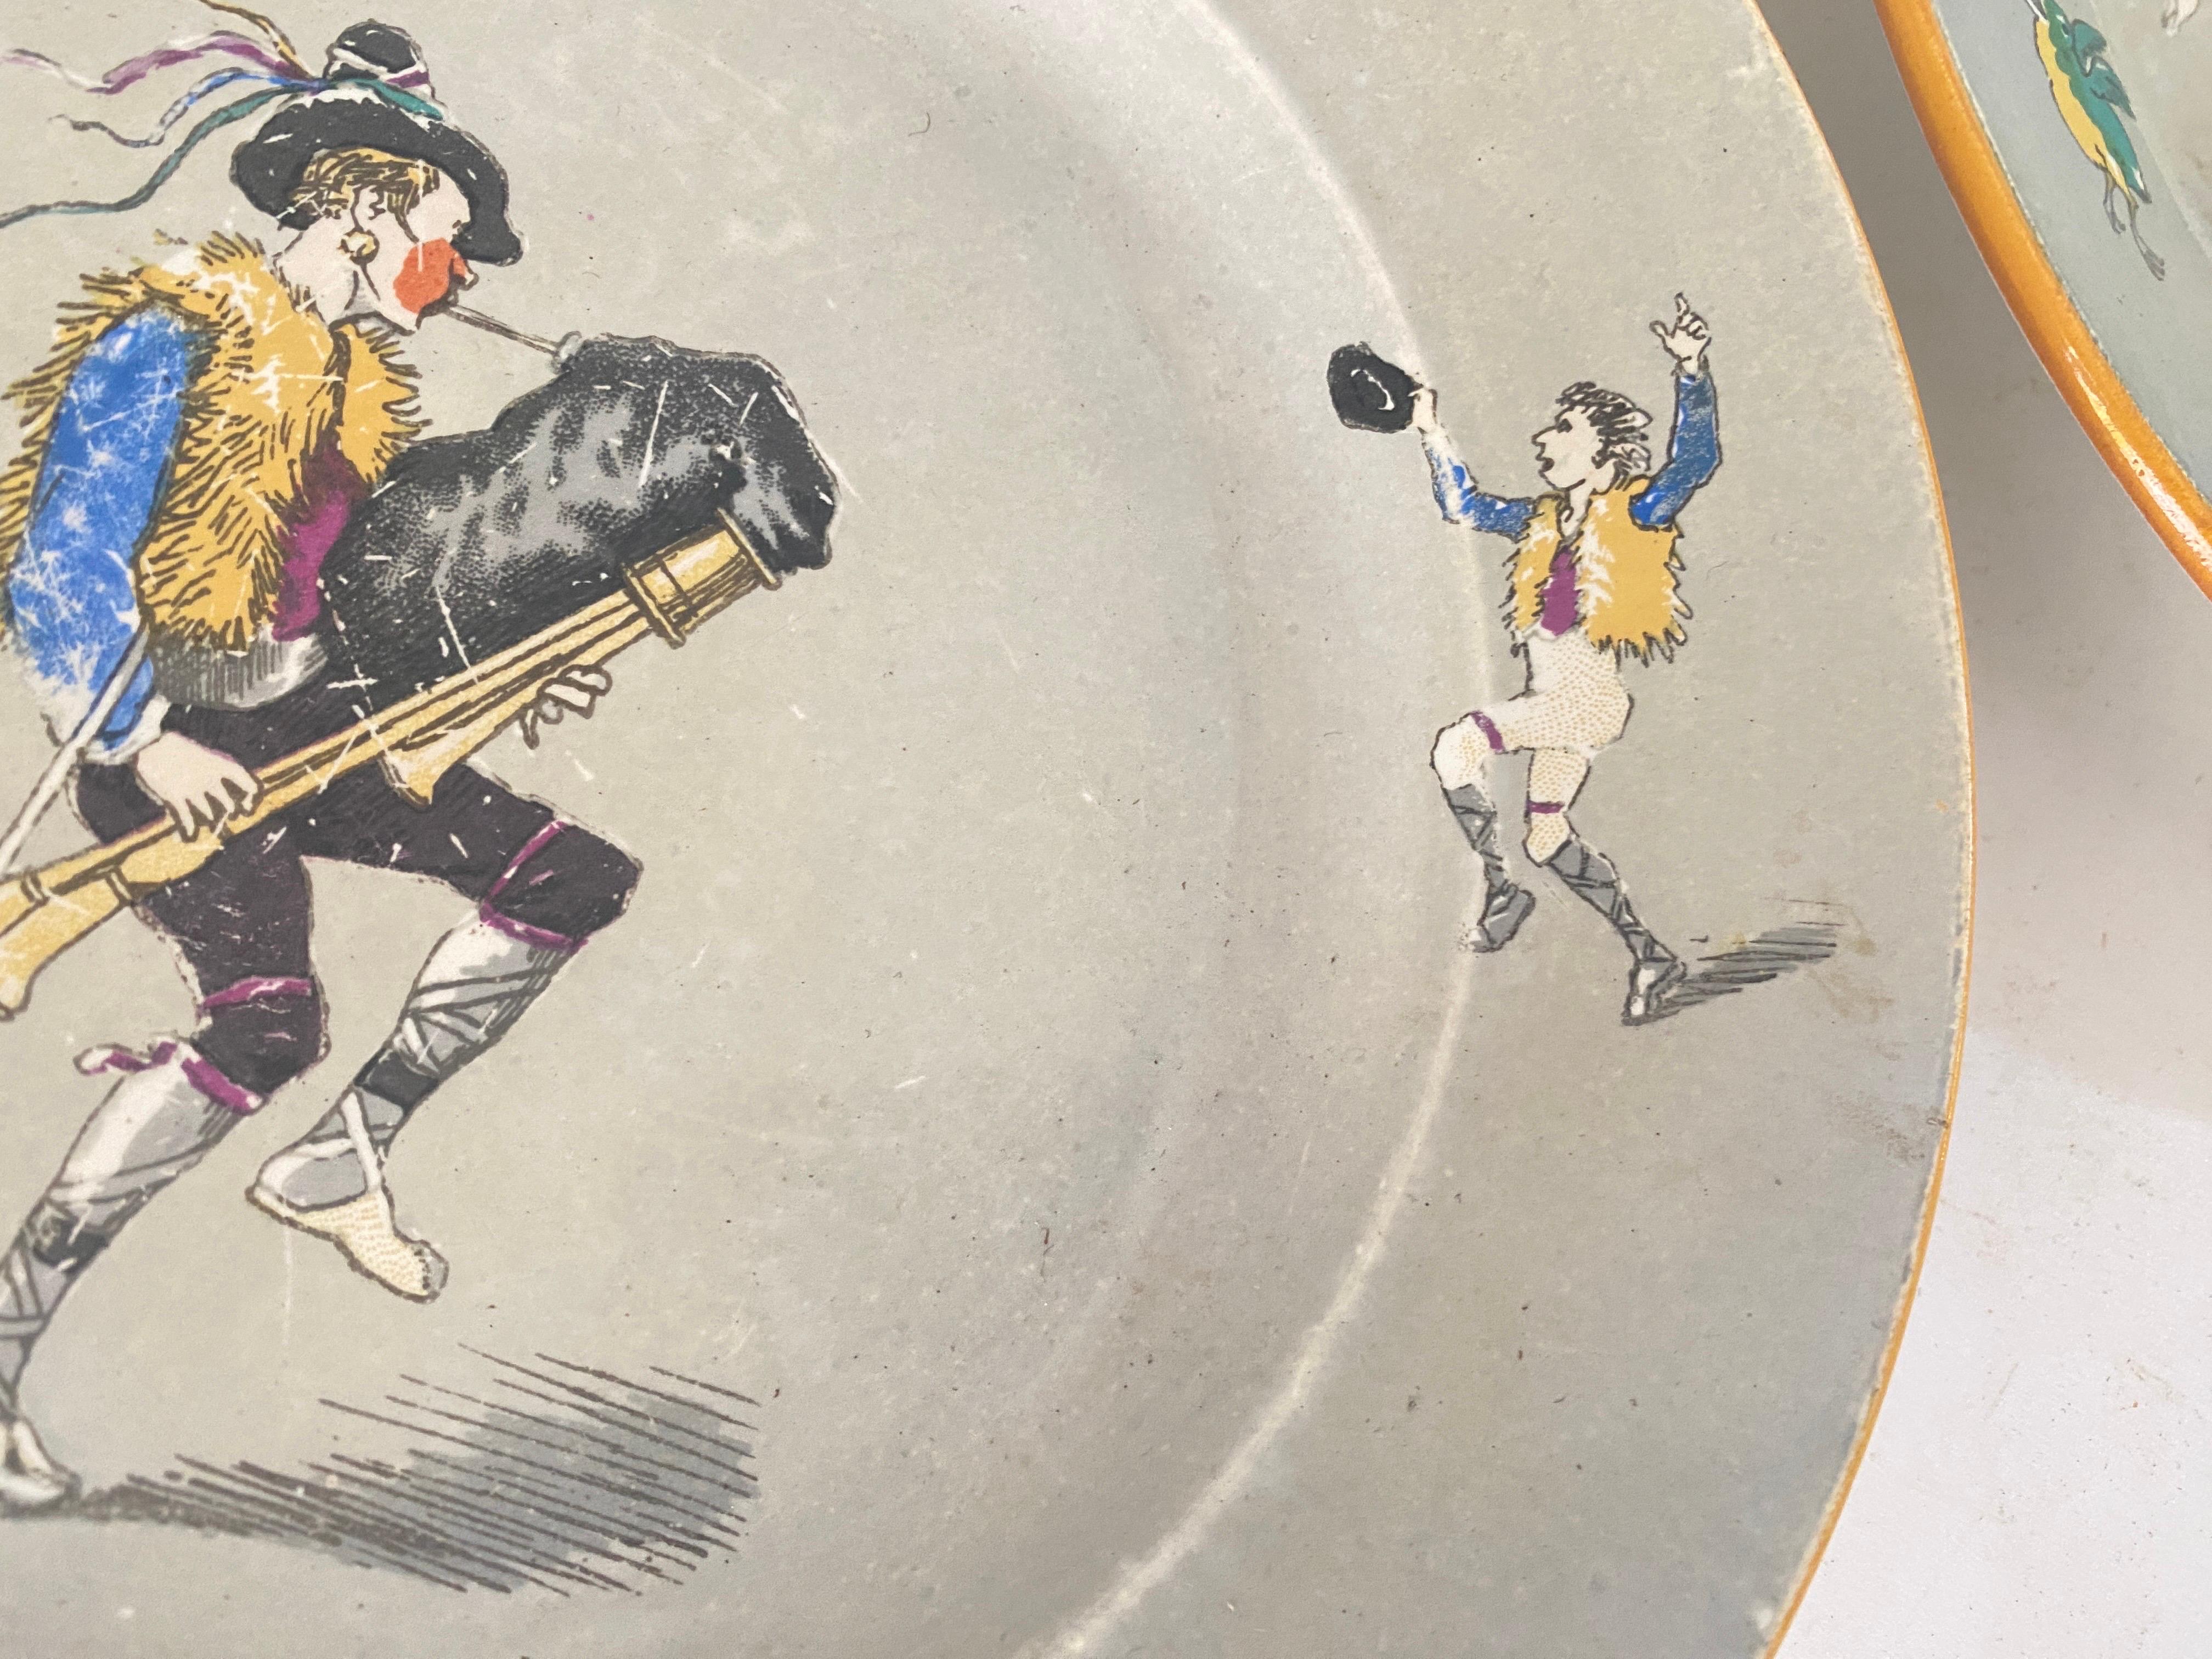 This plates demonstrates the attractiveness of French ceramists from the second half of the 19th century aesthetics and Far Eastern culture. Fascinated by its colors, shapes, artists redouble their ingenuity to give new aesthetic to their ceramics.